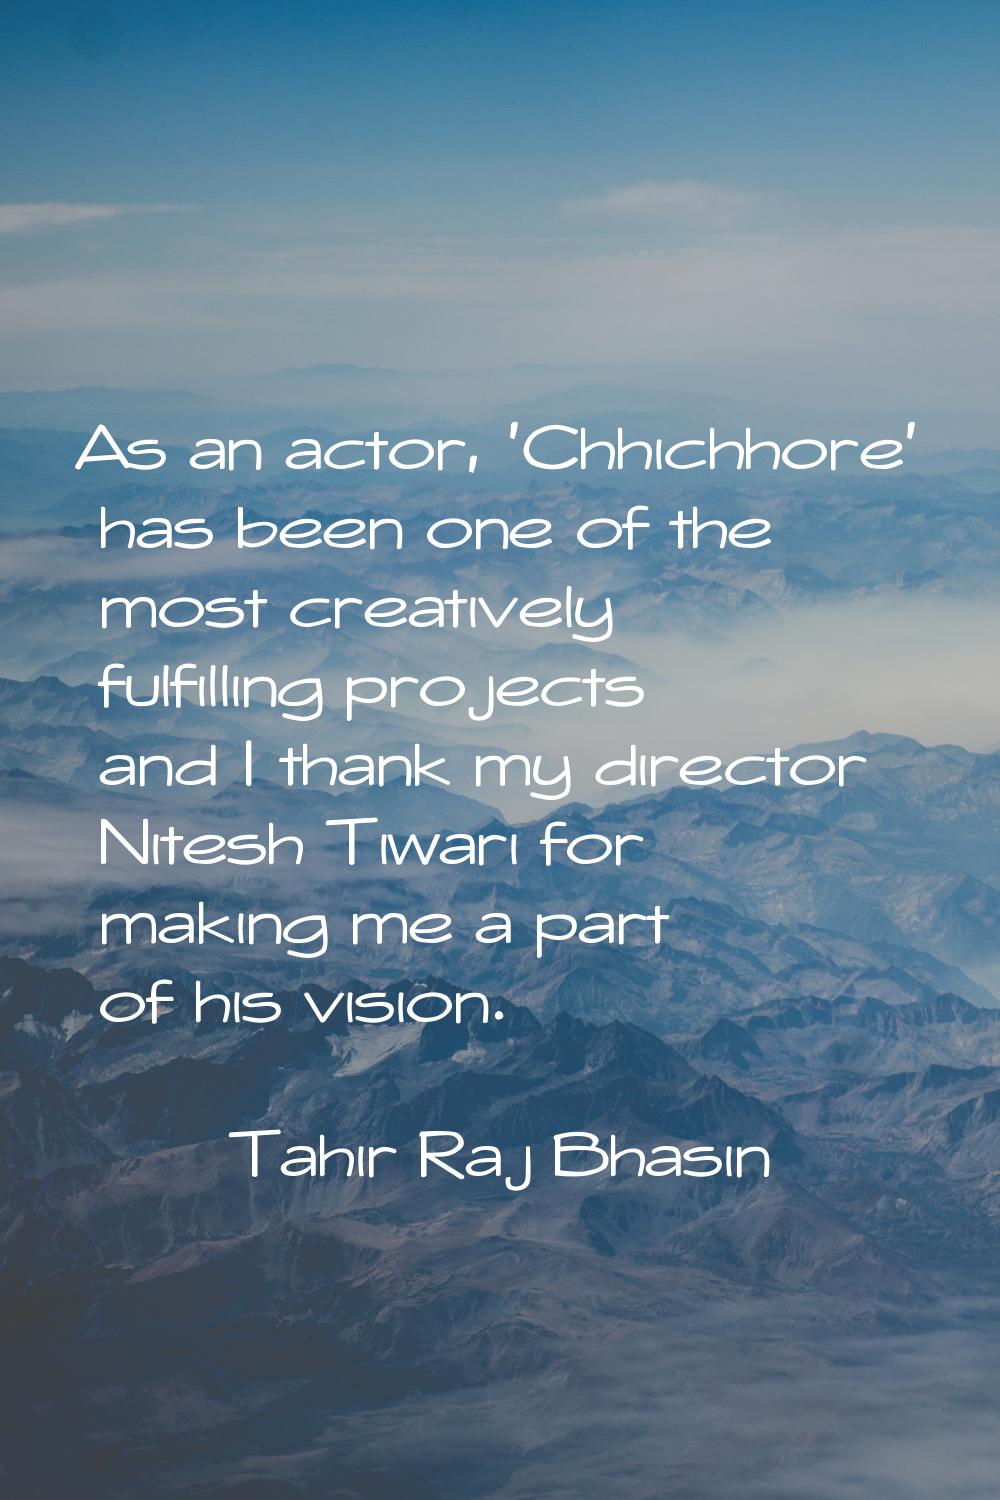 As an actor, 'Chhichhore' has been one of the most creatively fulfilling projects and I thank my di